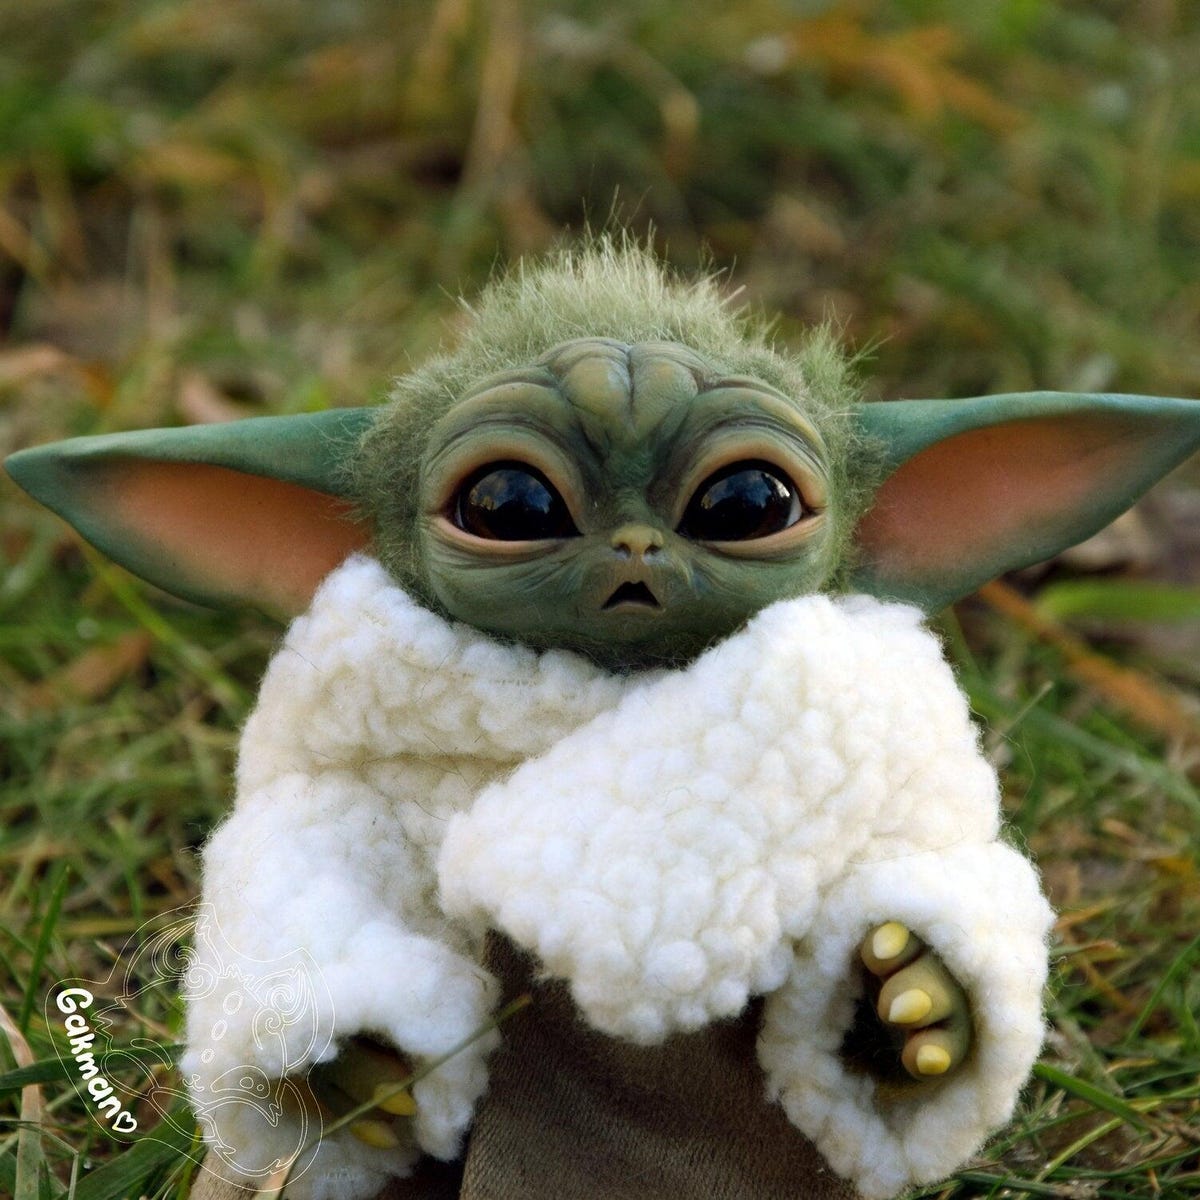 Baby Yoda $500 toy has a 14-month waitlist - CNET